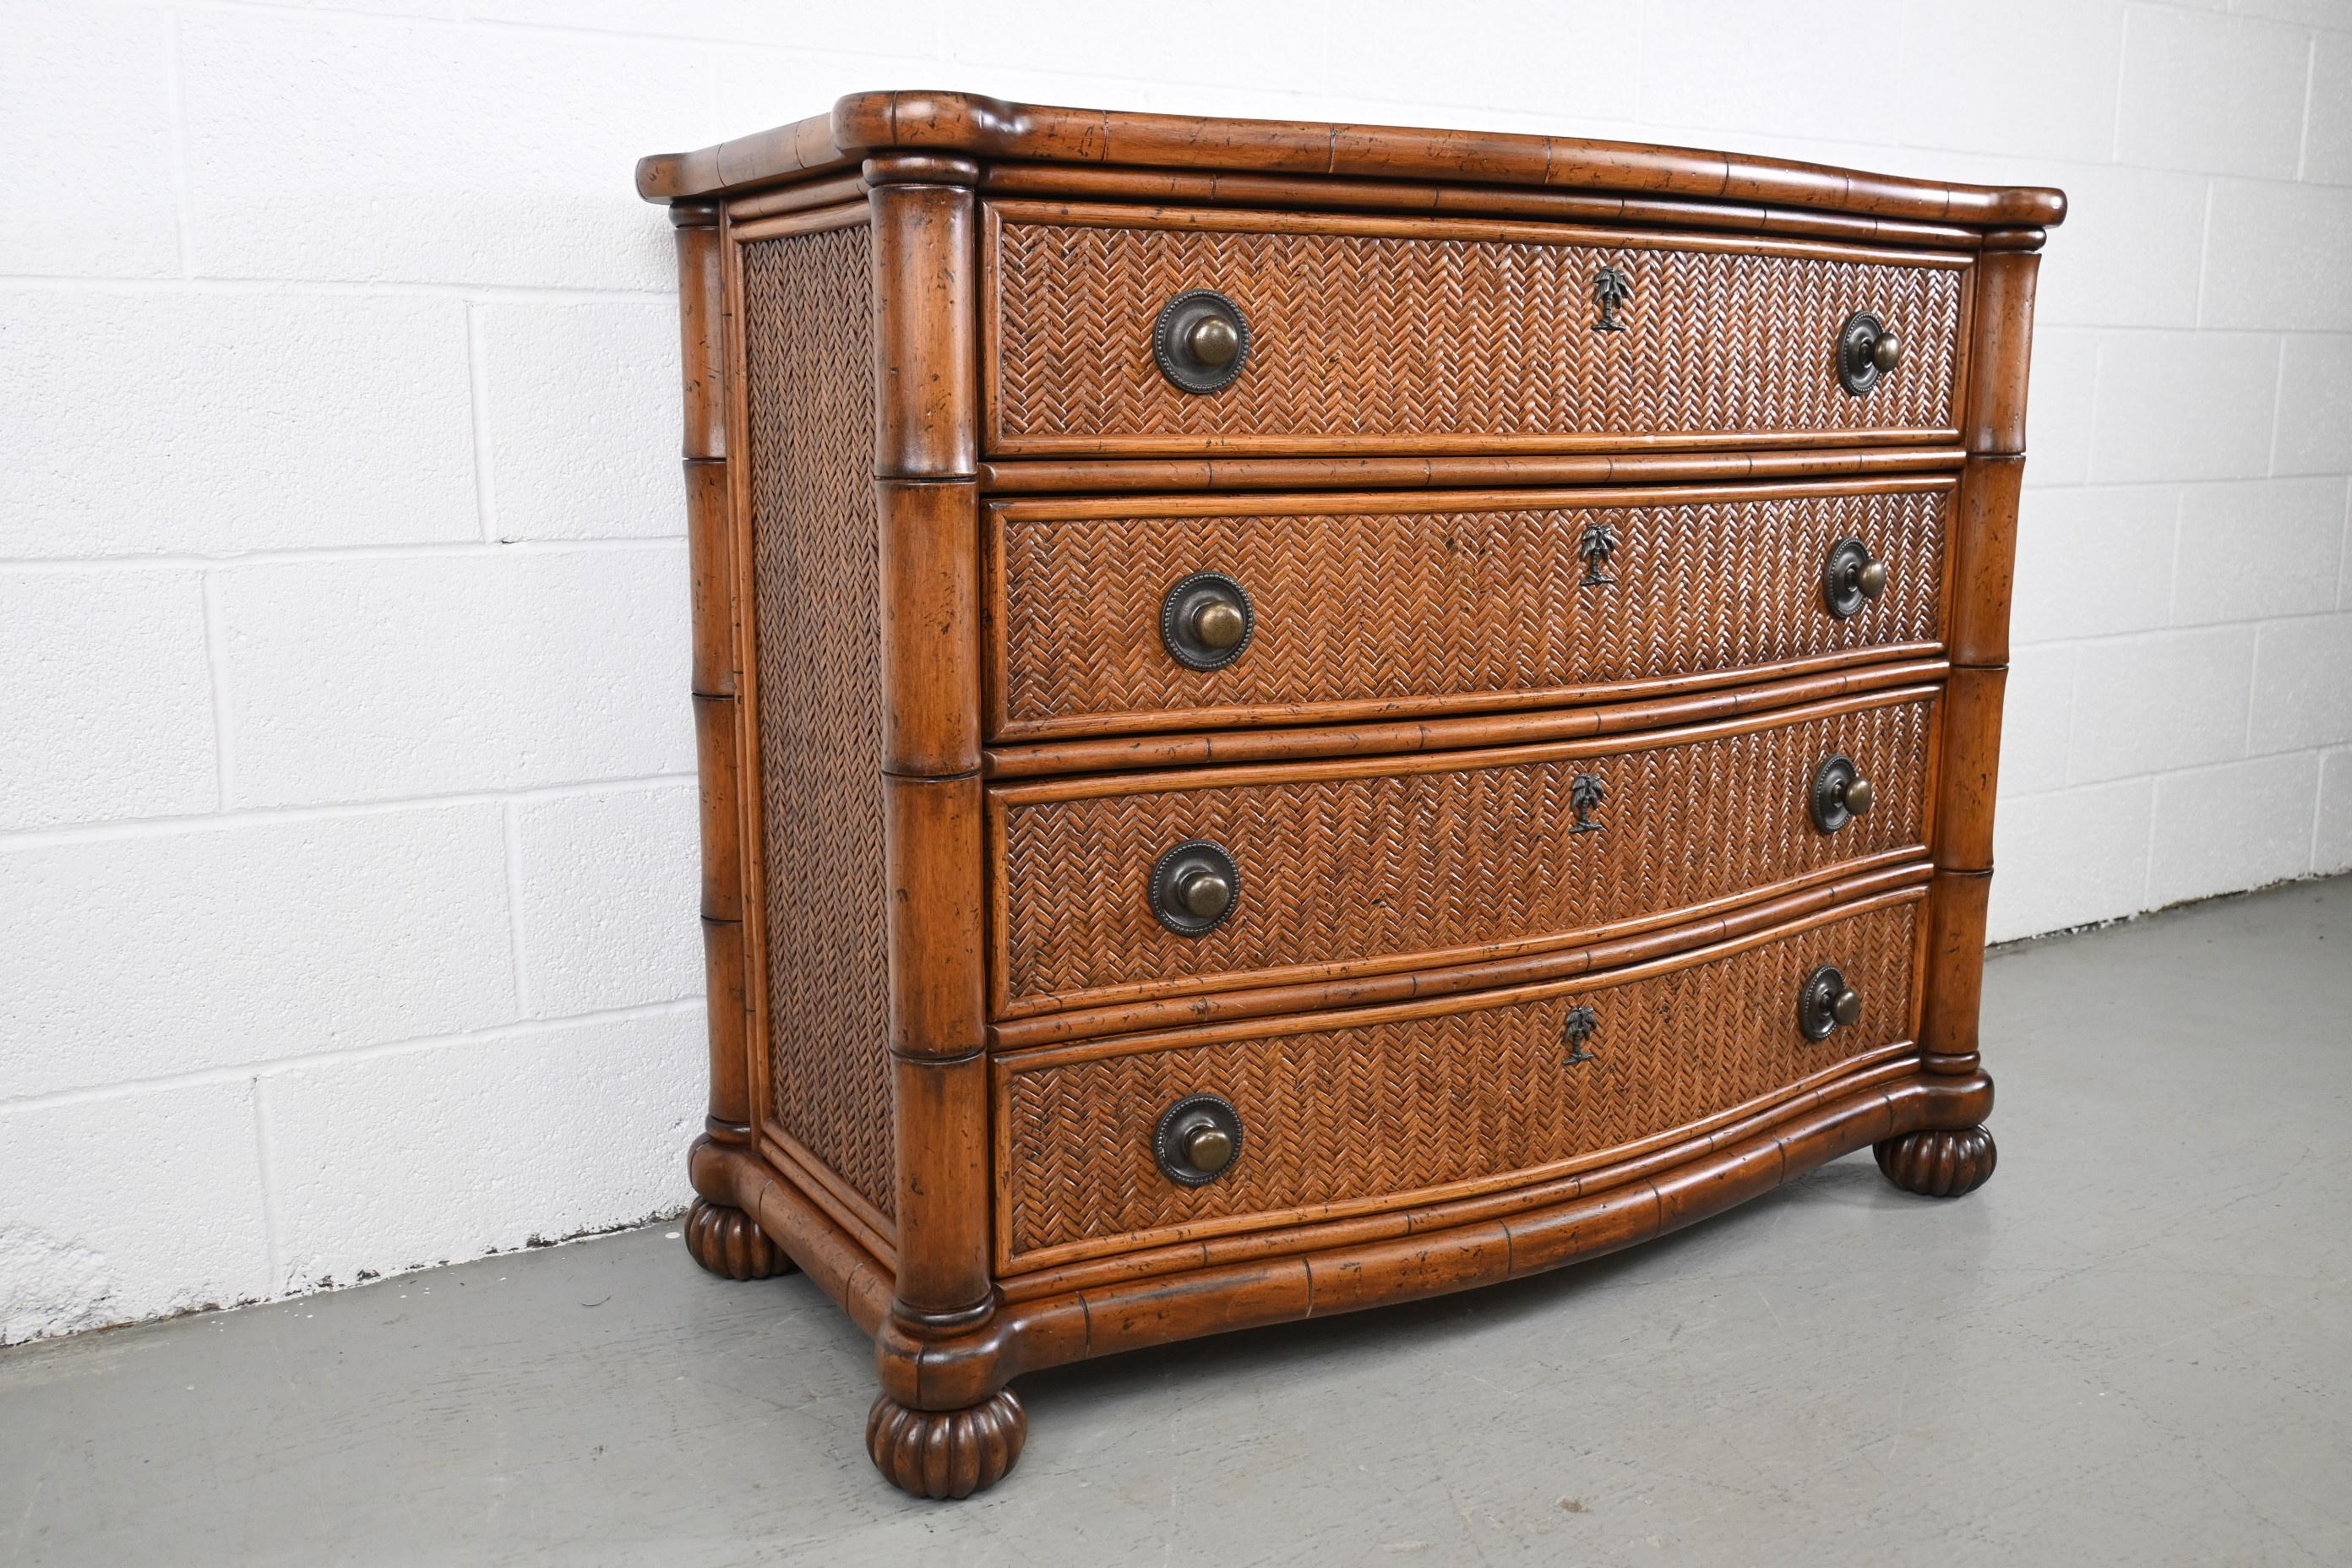 Tommy Bahama Faux Bamboo Four Drawer Dresser

Lexington Furniture, 2000s

Measures: 44 Wide x 21.5 Deep x 35.75 High

Faux bamboo dresser with woven front and Tommy Bahama palm tree escutcheon on each of the four drawers with purposefully